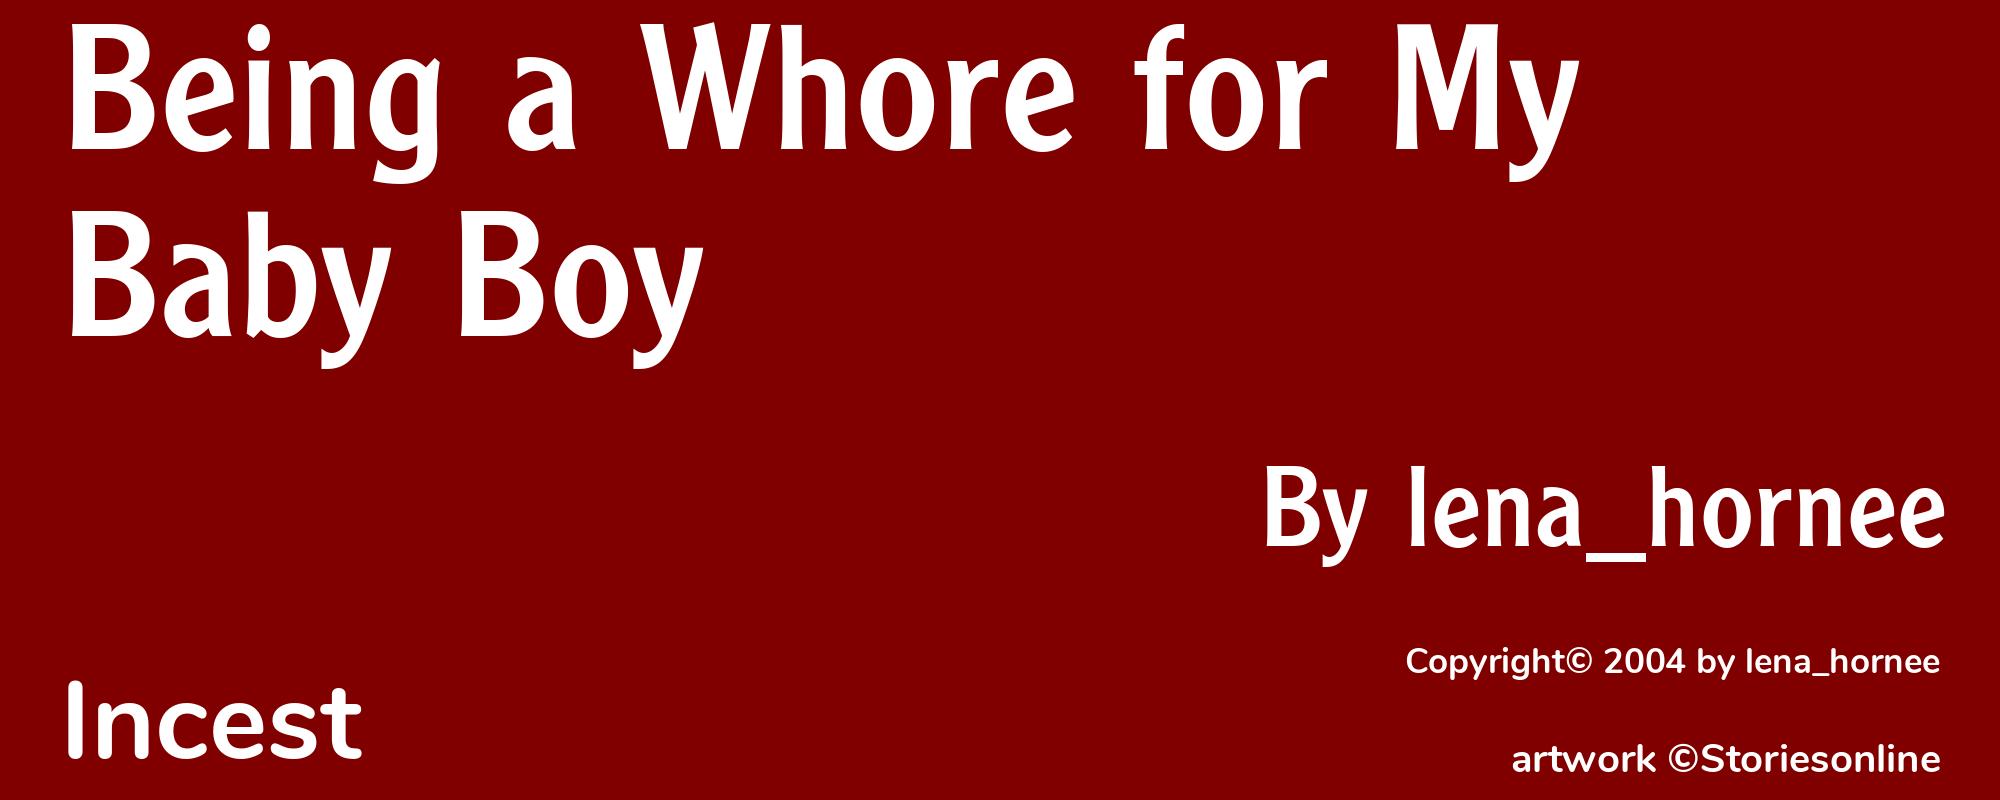 Being a Whore for My Baby Boy - Cover